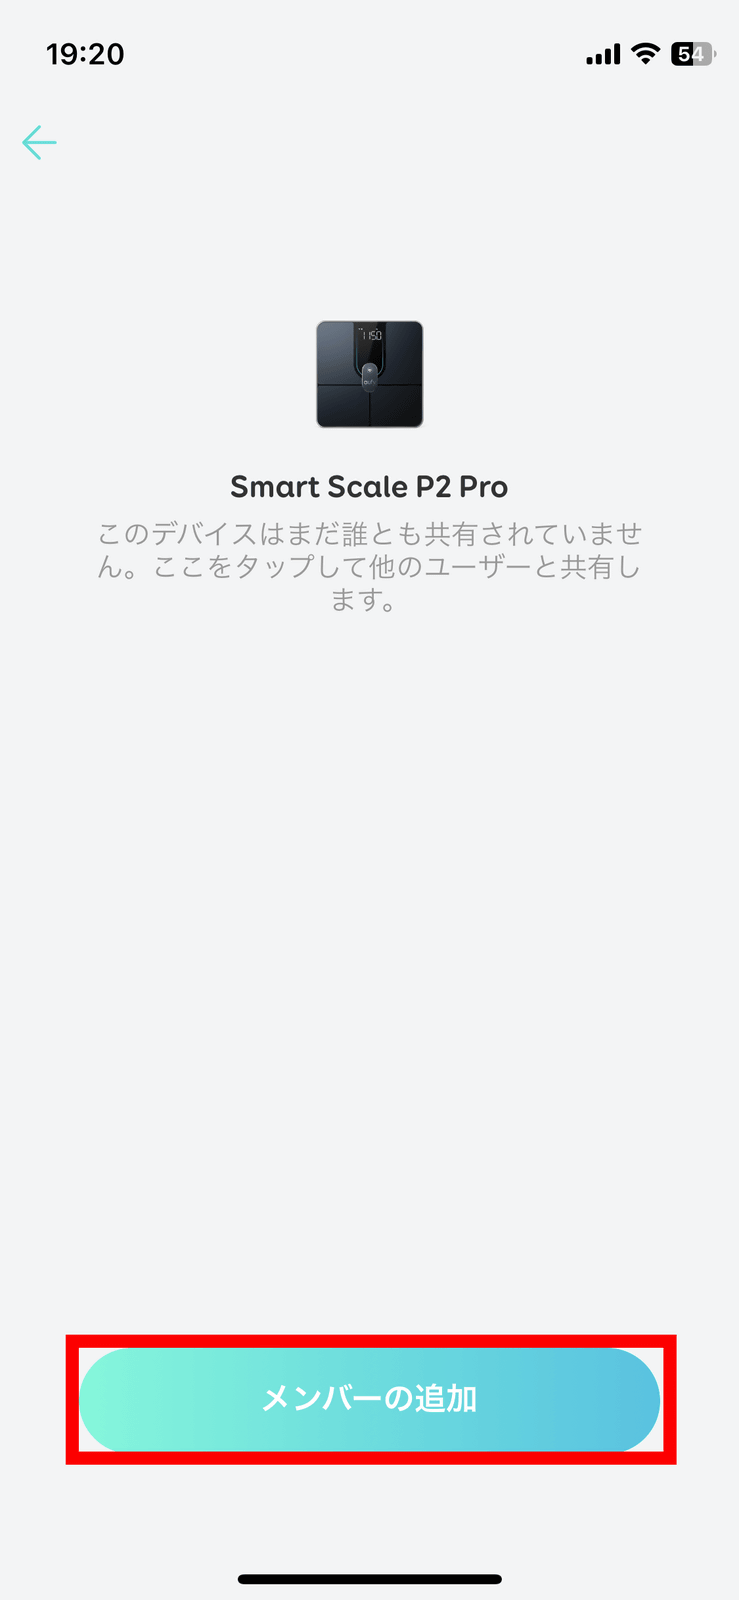 https://i.gzn.jp/img/2023/01/06/eufy-smart-scale-p2-pro-manage/11.png